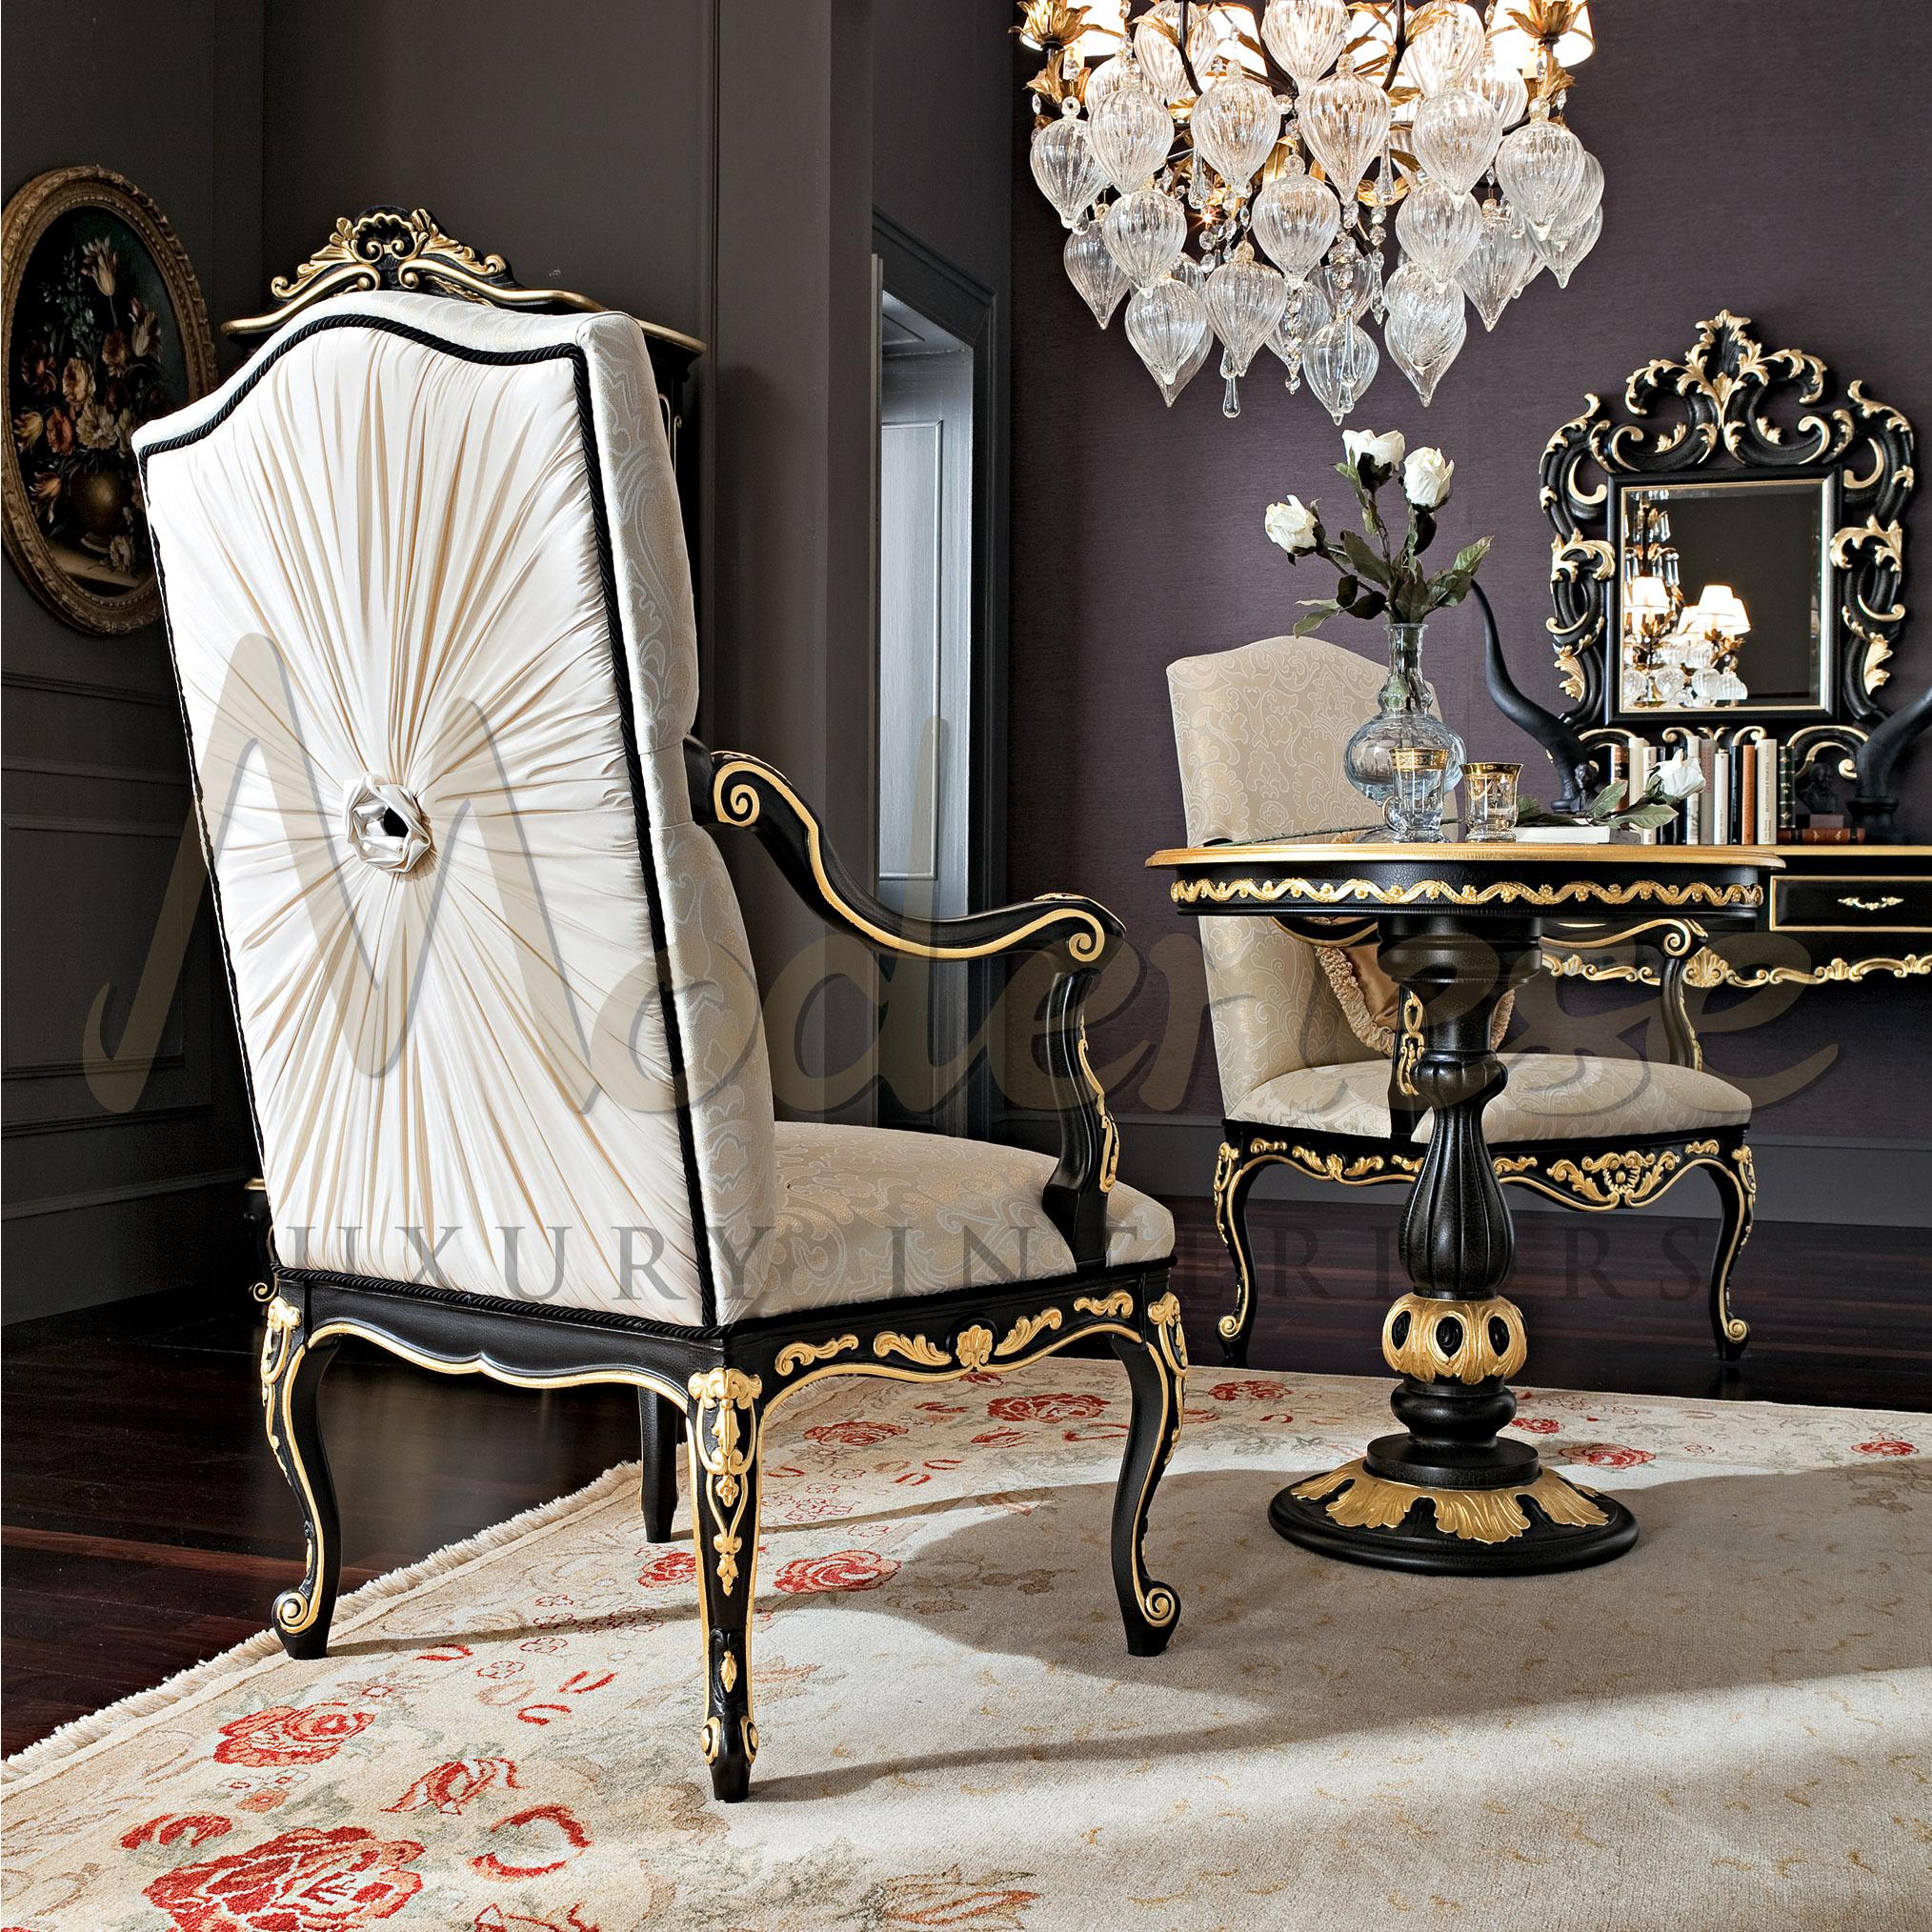 A glimps to the past, with this handcrafted luxury piece of timeless rococo beauty. An elegant floral upholstered seating gracefully on top of the contrast black painted carving wooden frame. A beautiful golden decorative details carefully added as